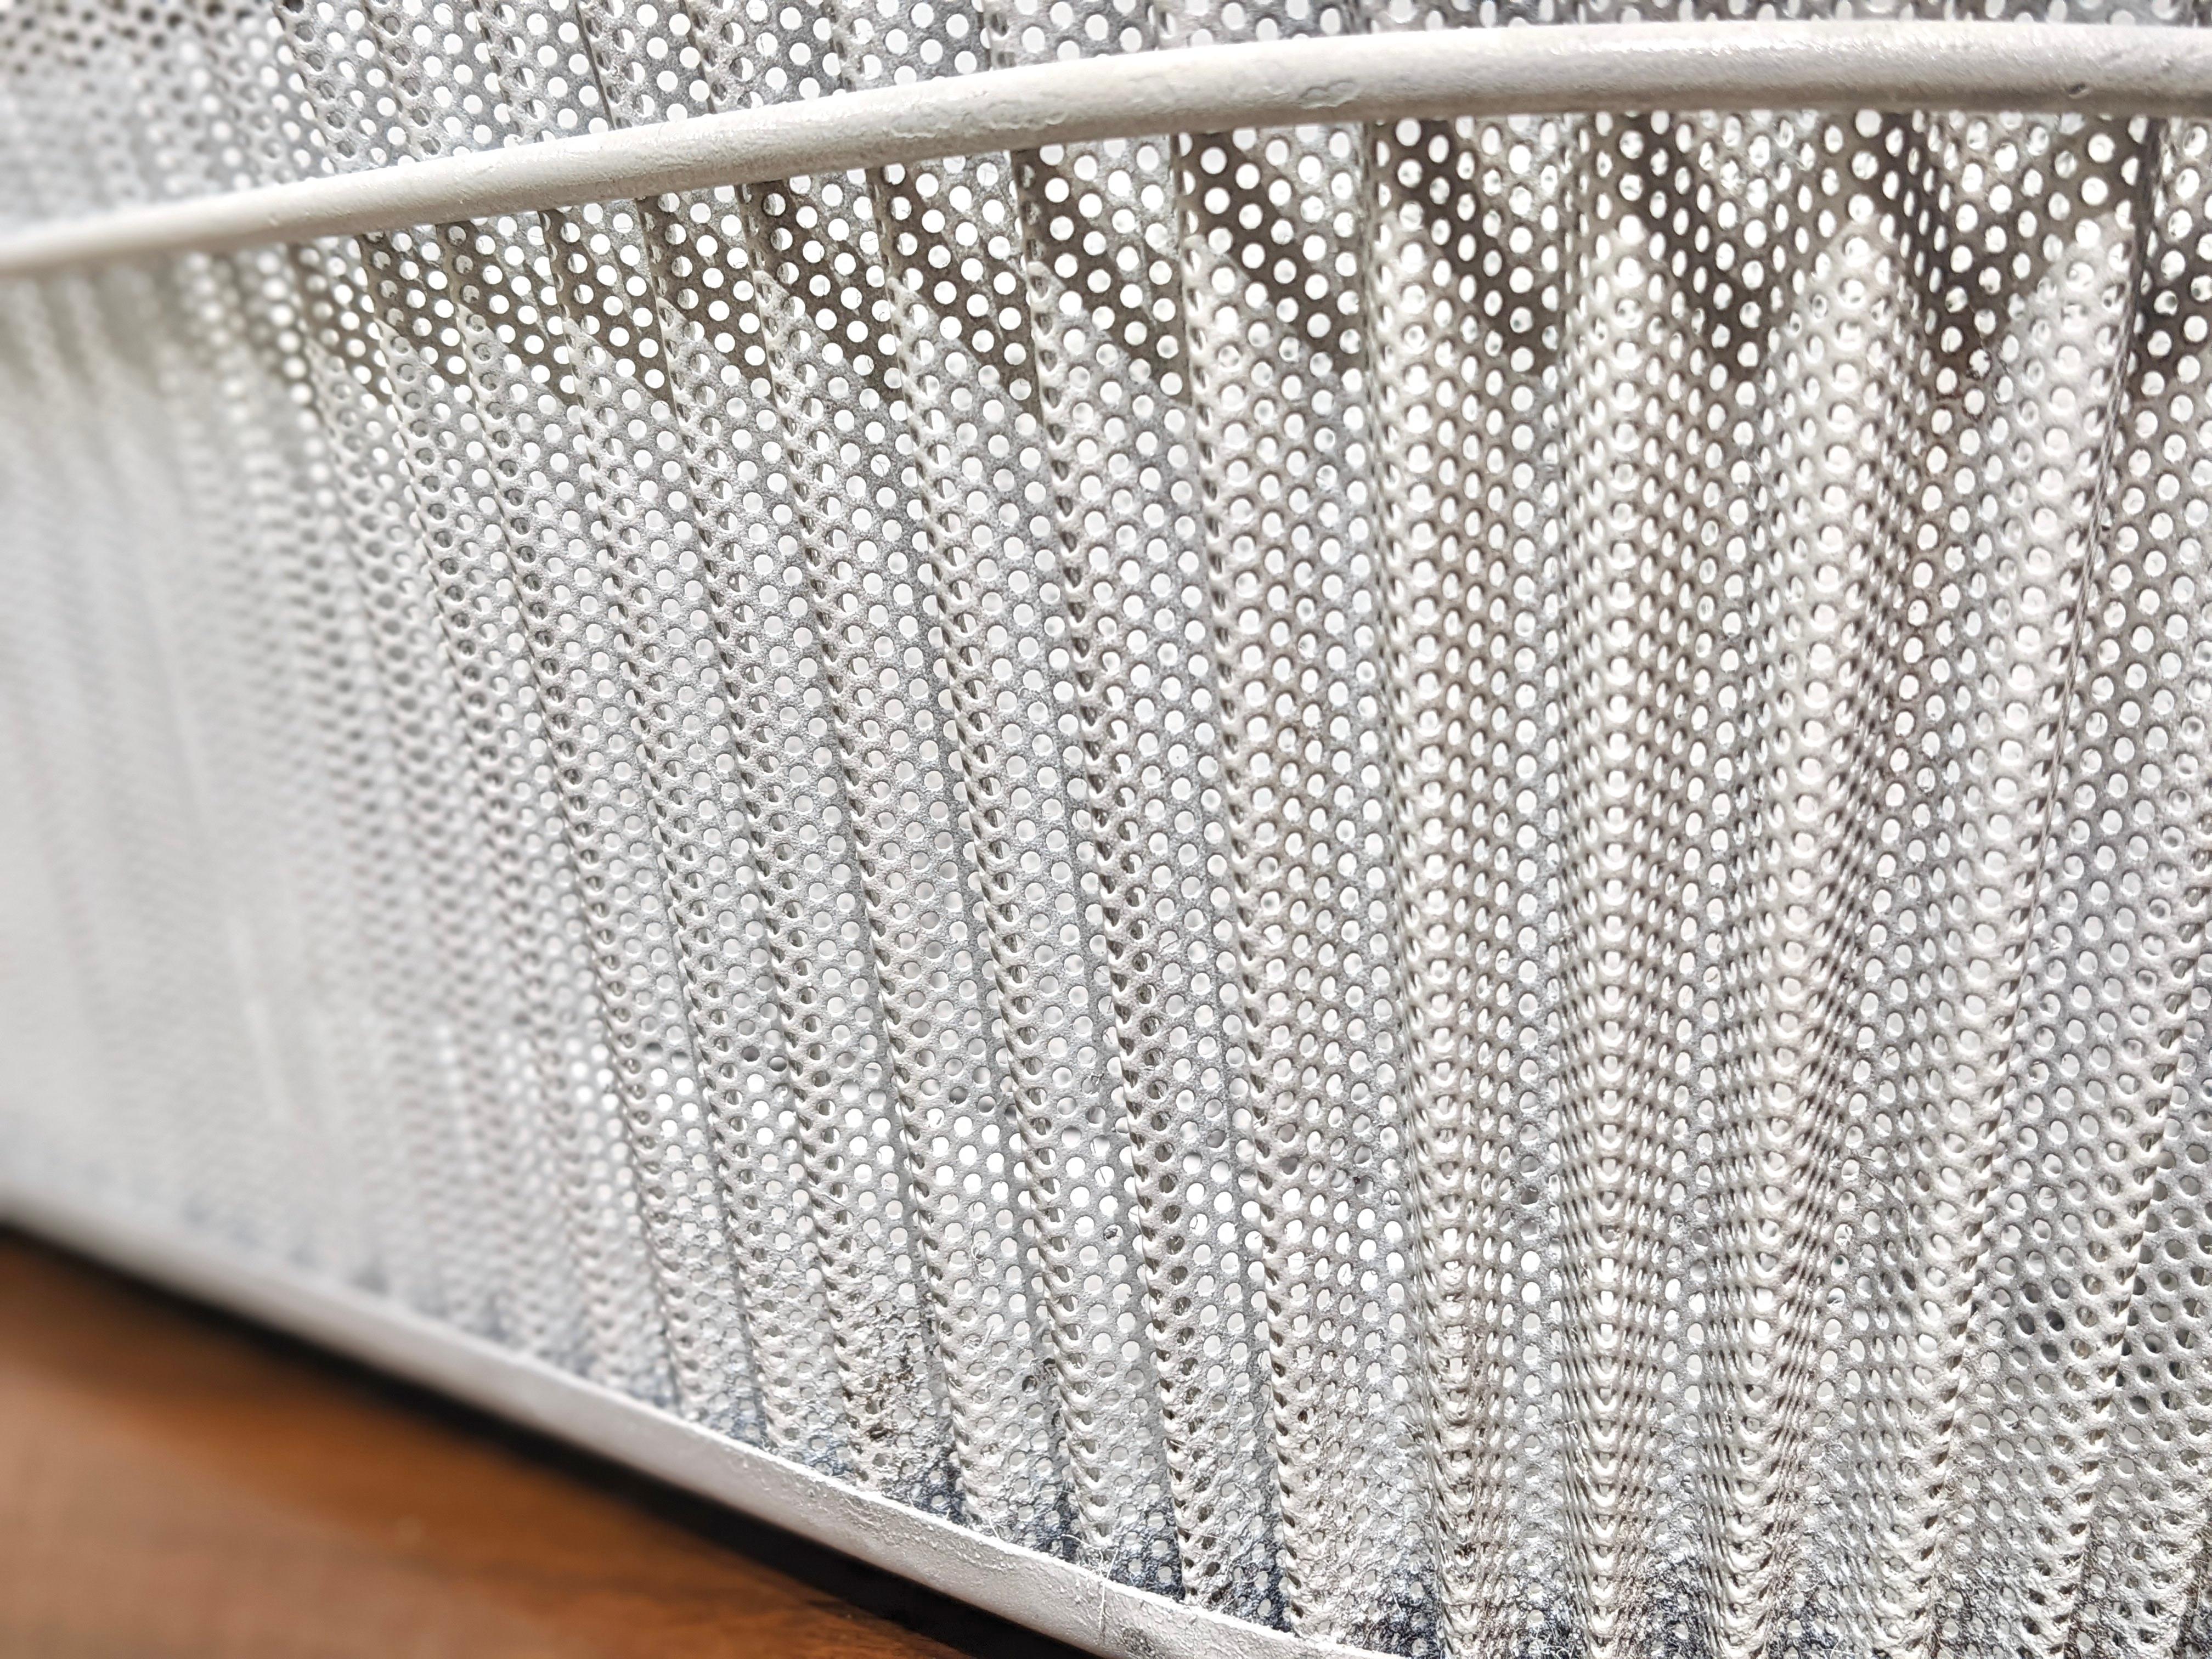 Mid-Century Modern Planter in White Perforated Sheet Metal by Mathieu Matégot For Sale